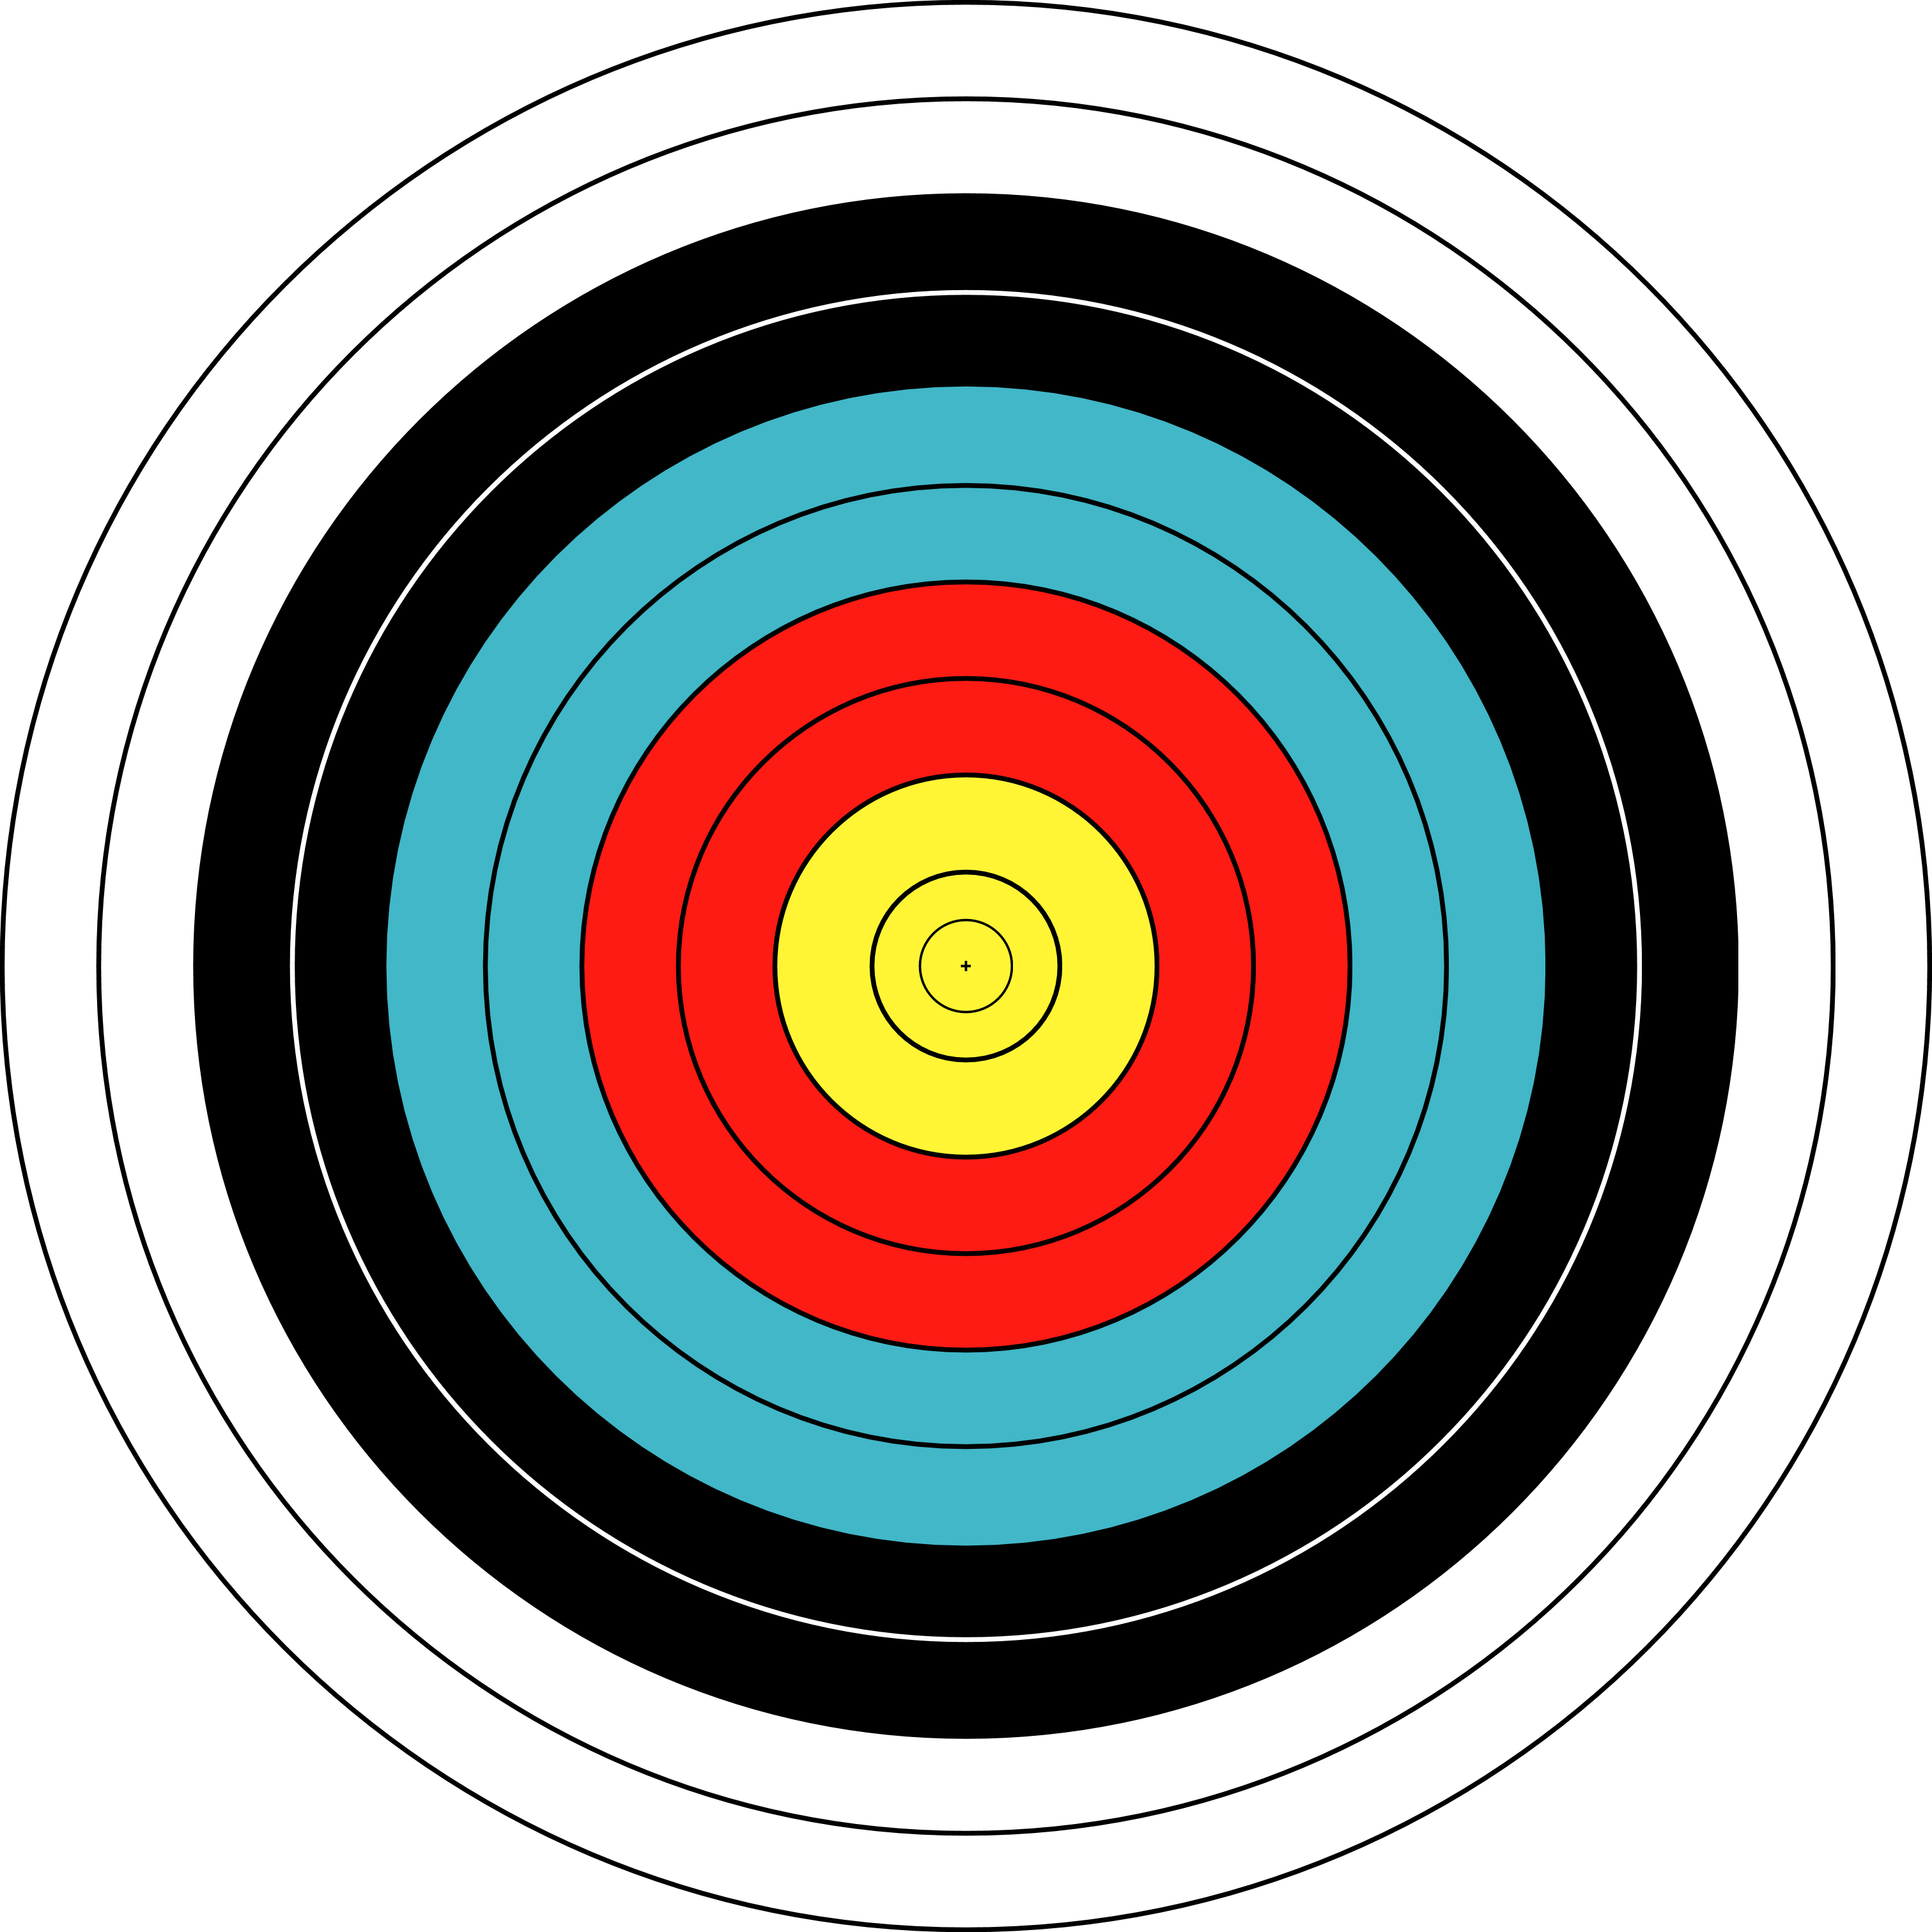 Picture Of A Bullseye - ClipArt Best